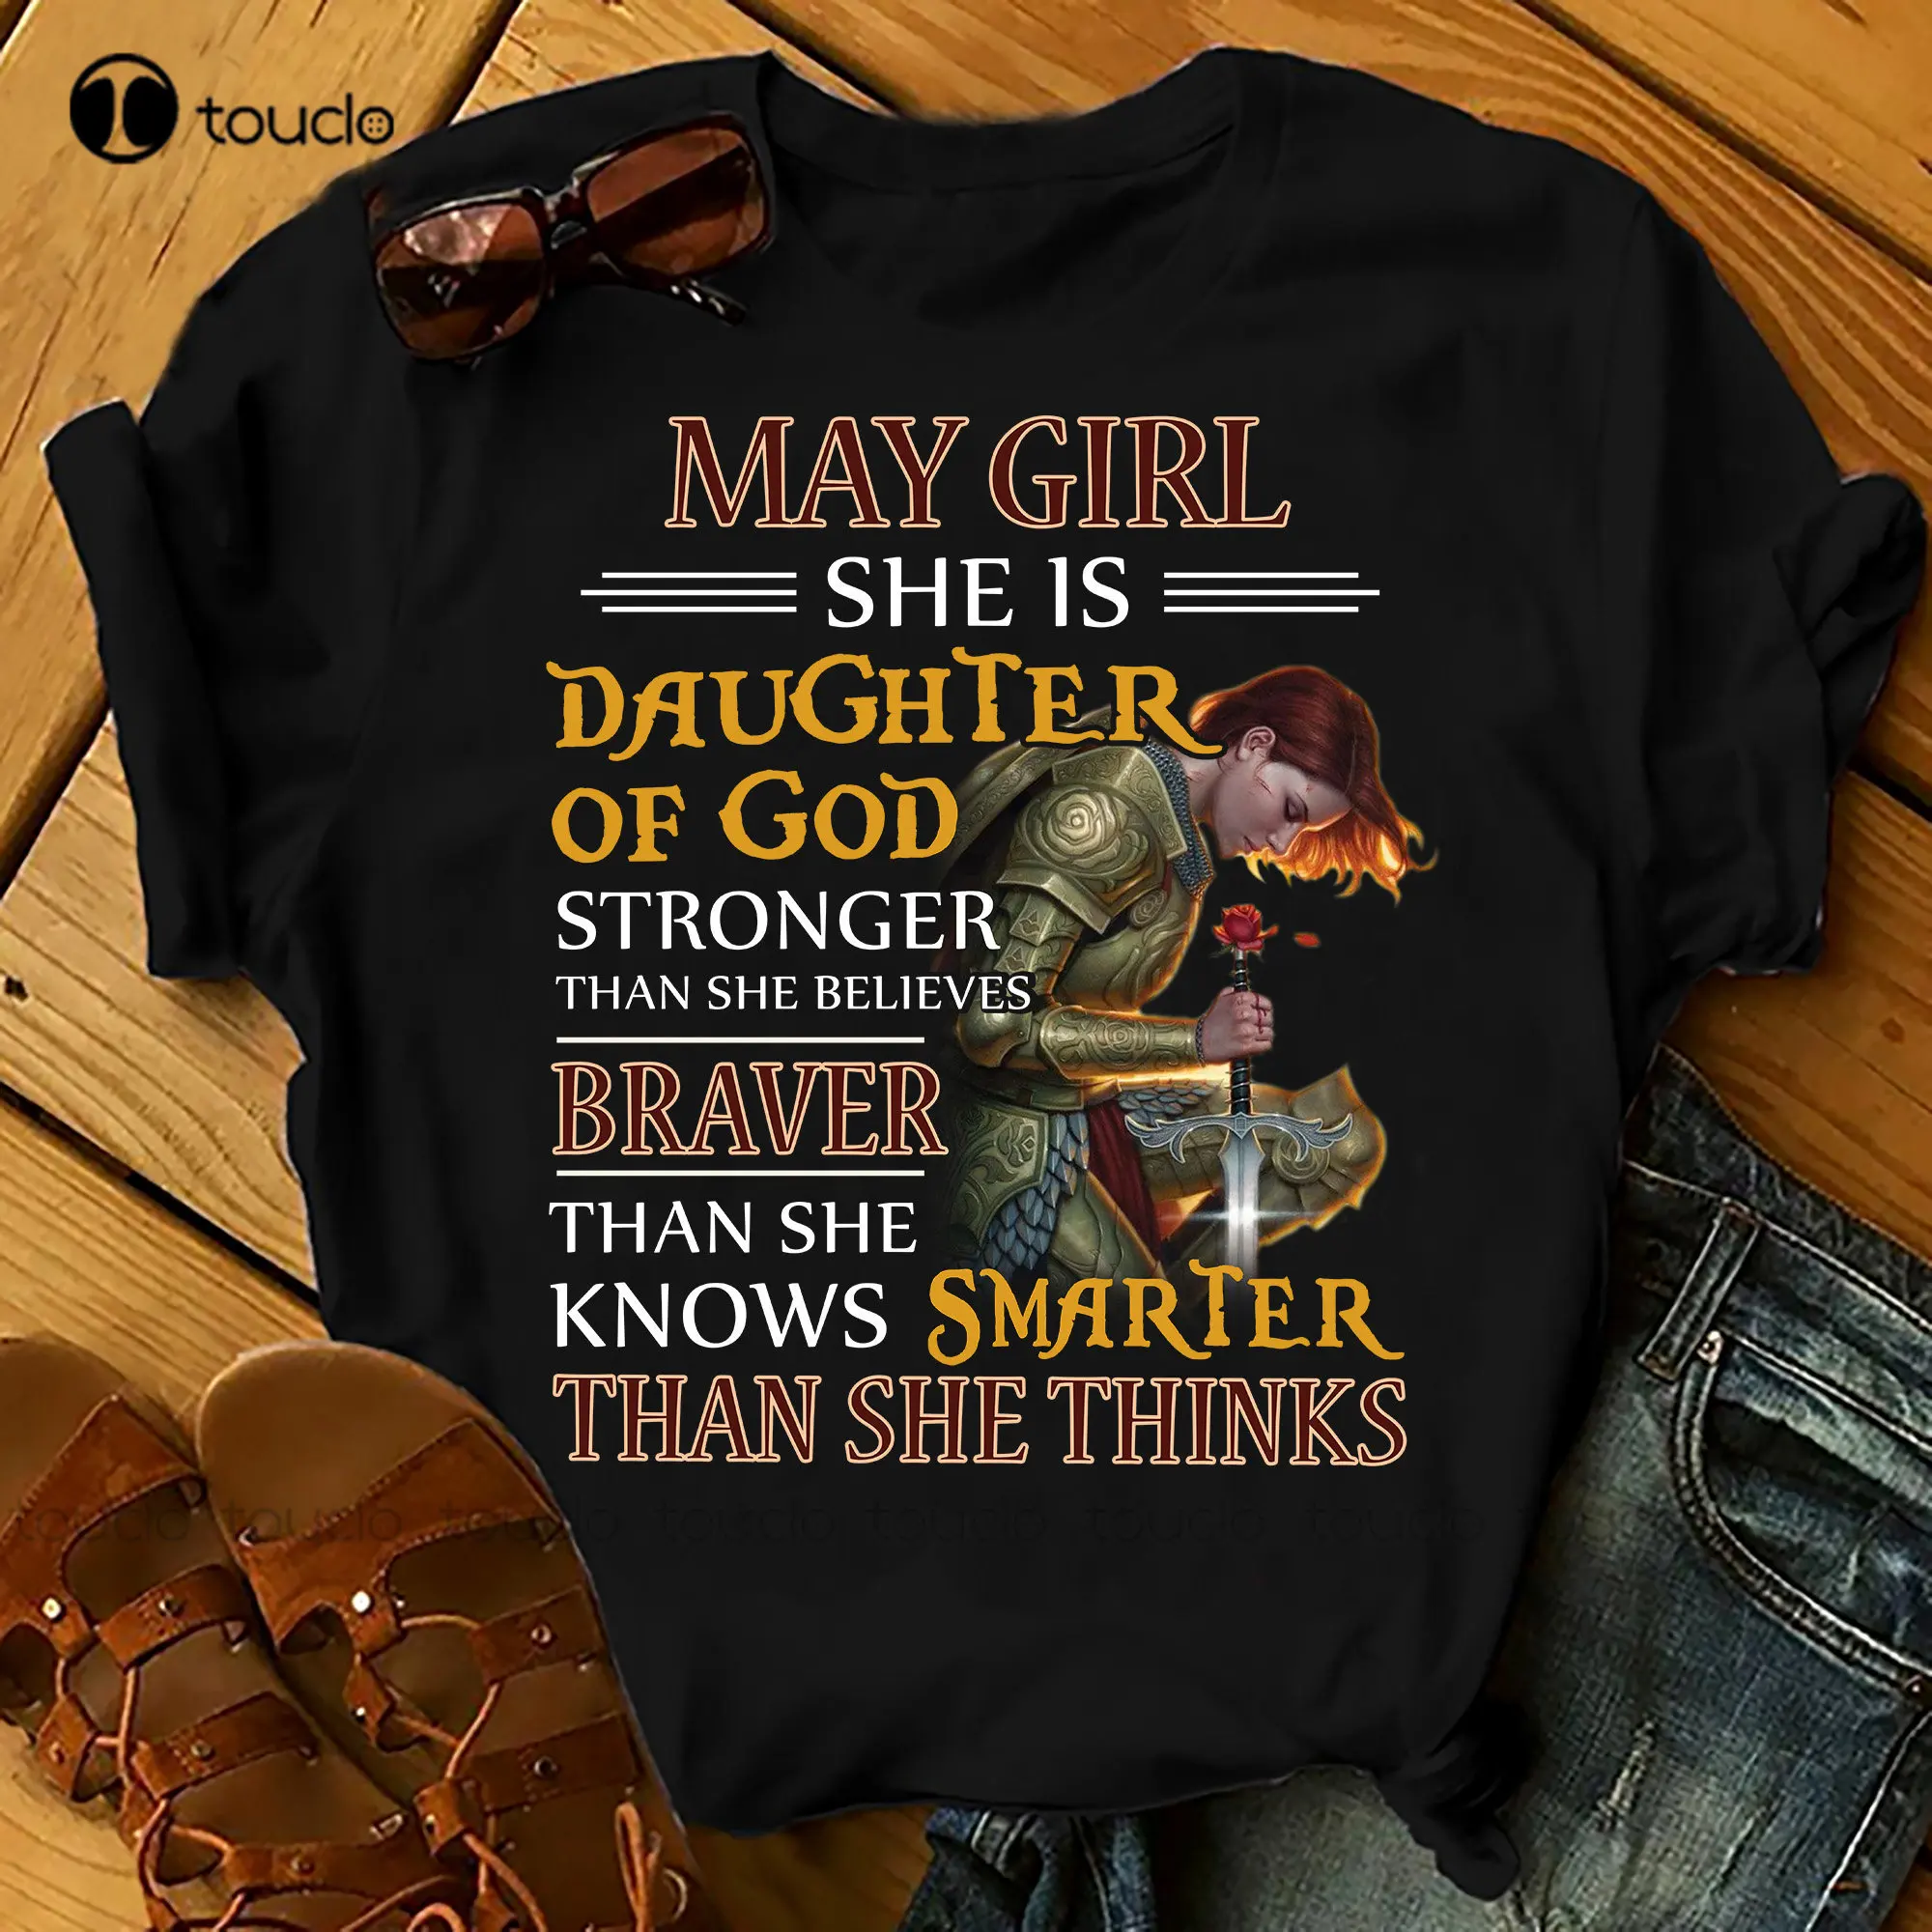 

Month Customised Personalised - May Girl Strong Brave Smart - Shirts Women Birthday T Shirts Summer Tops Beach T Shirts Xs-5Xl